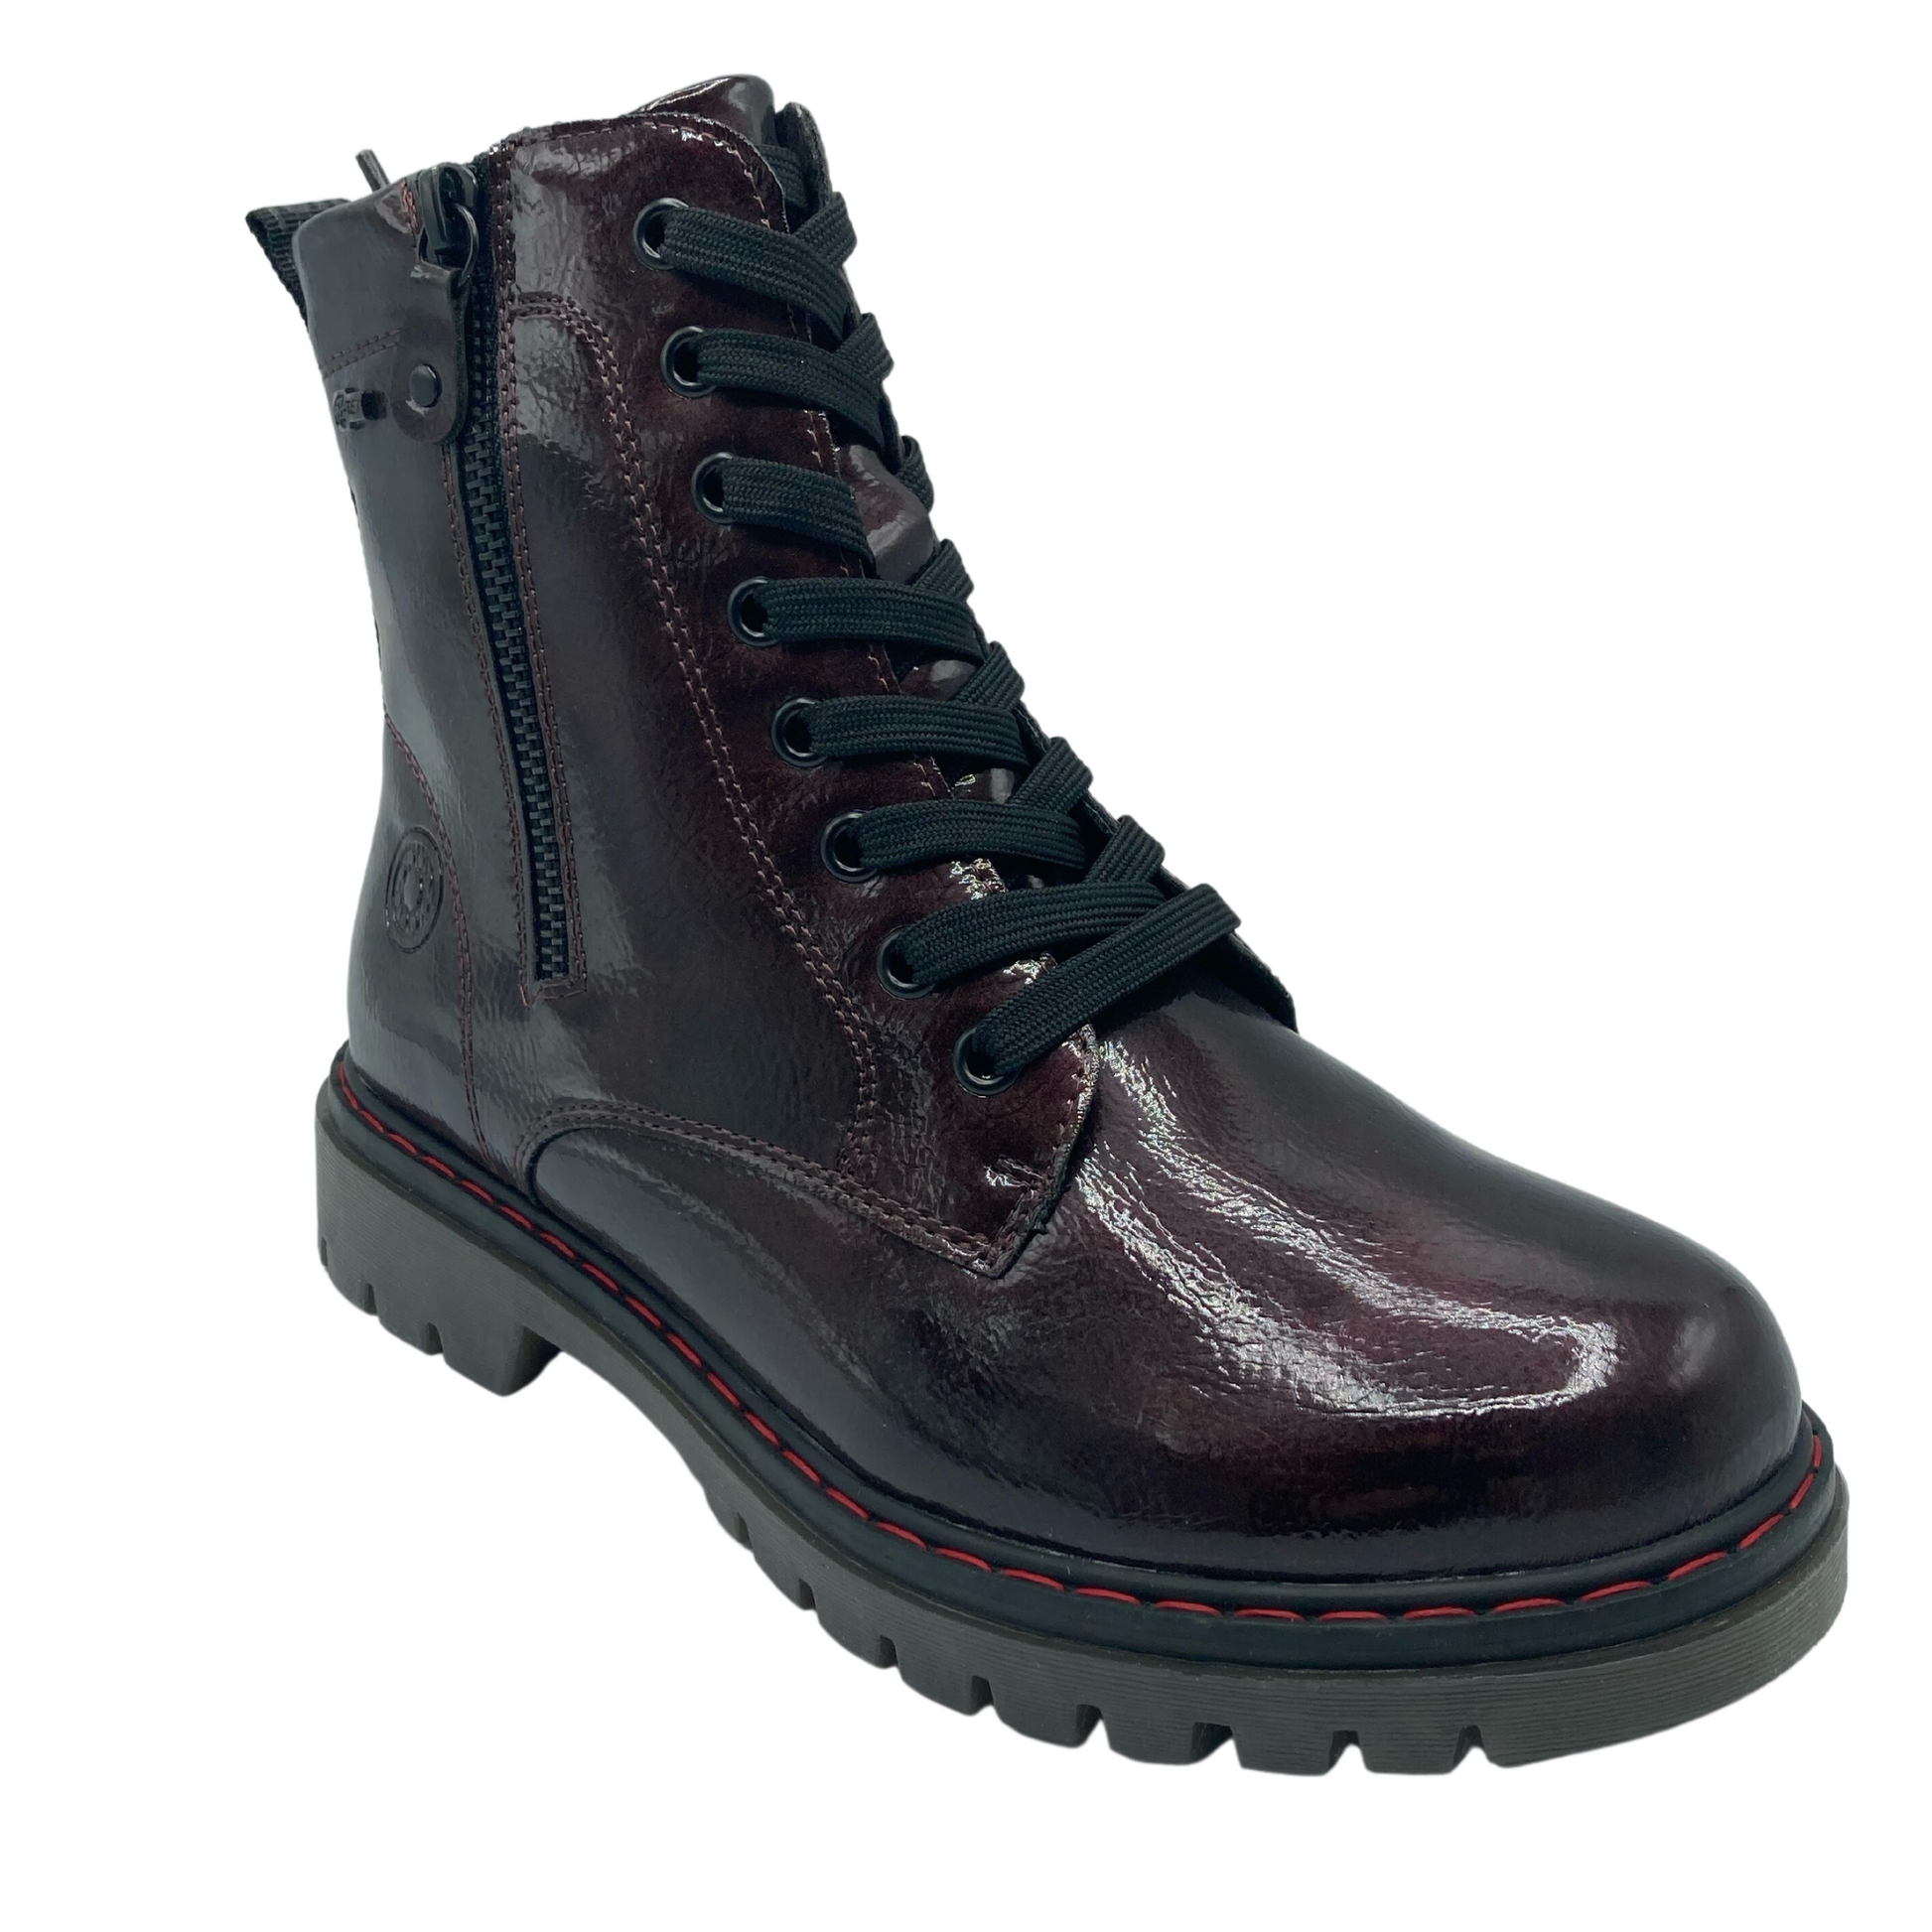 45 degree angled view of vegan leather wine short boot with lace up front and double side zippers